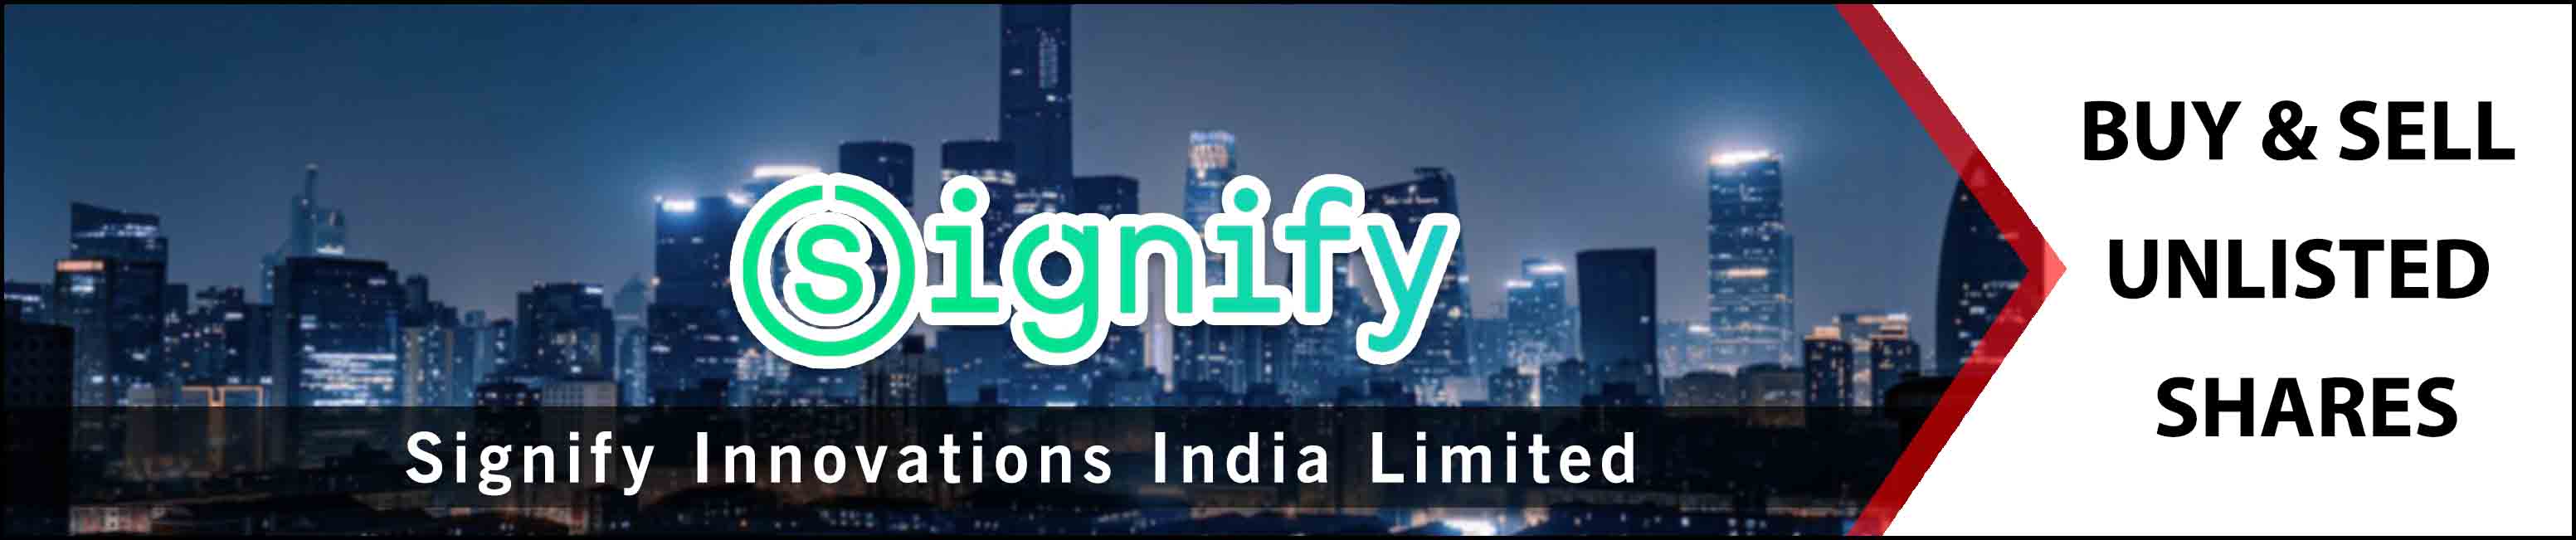 Signify Innovation India Limited